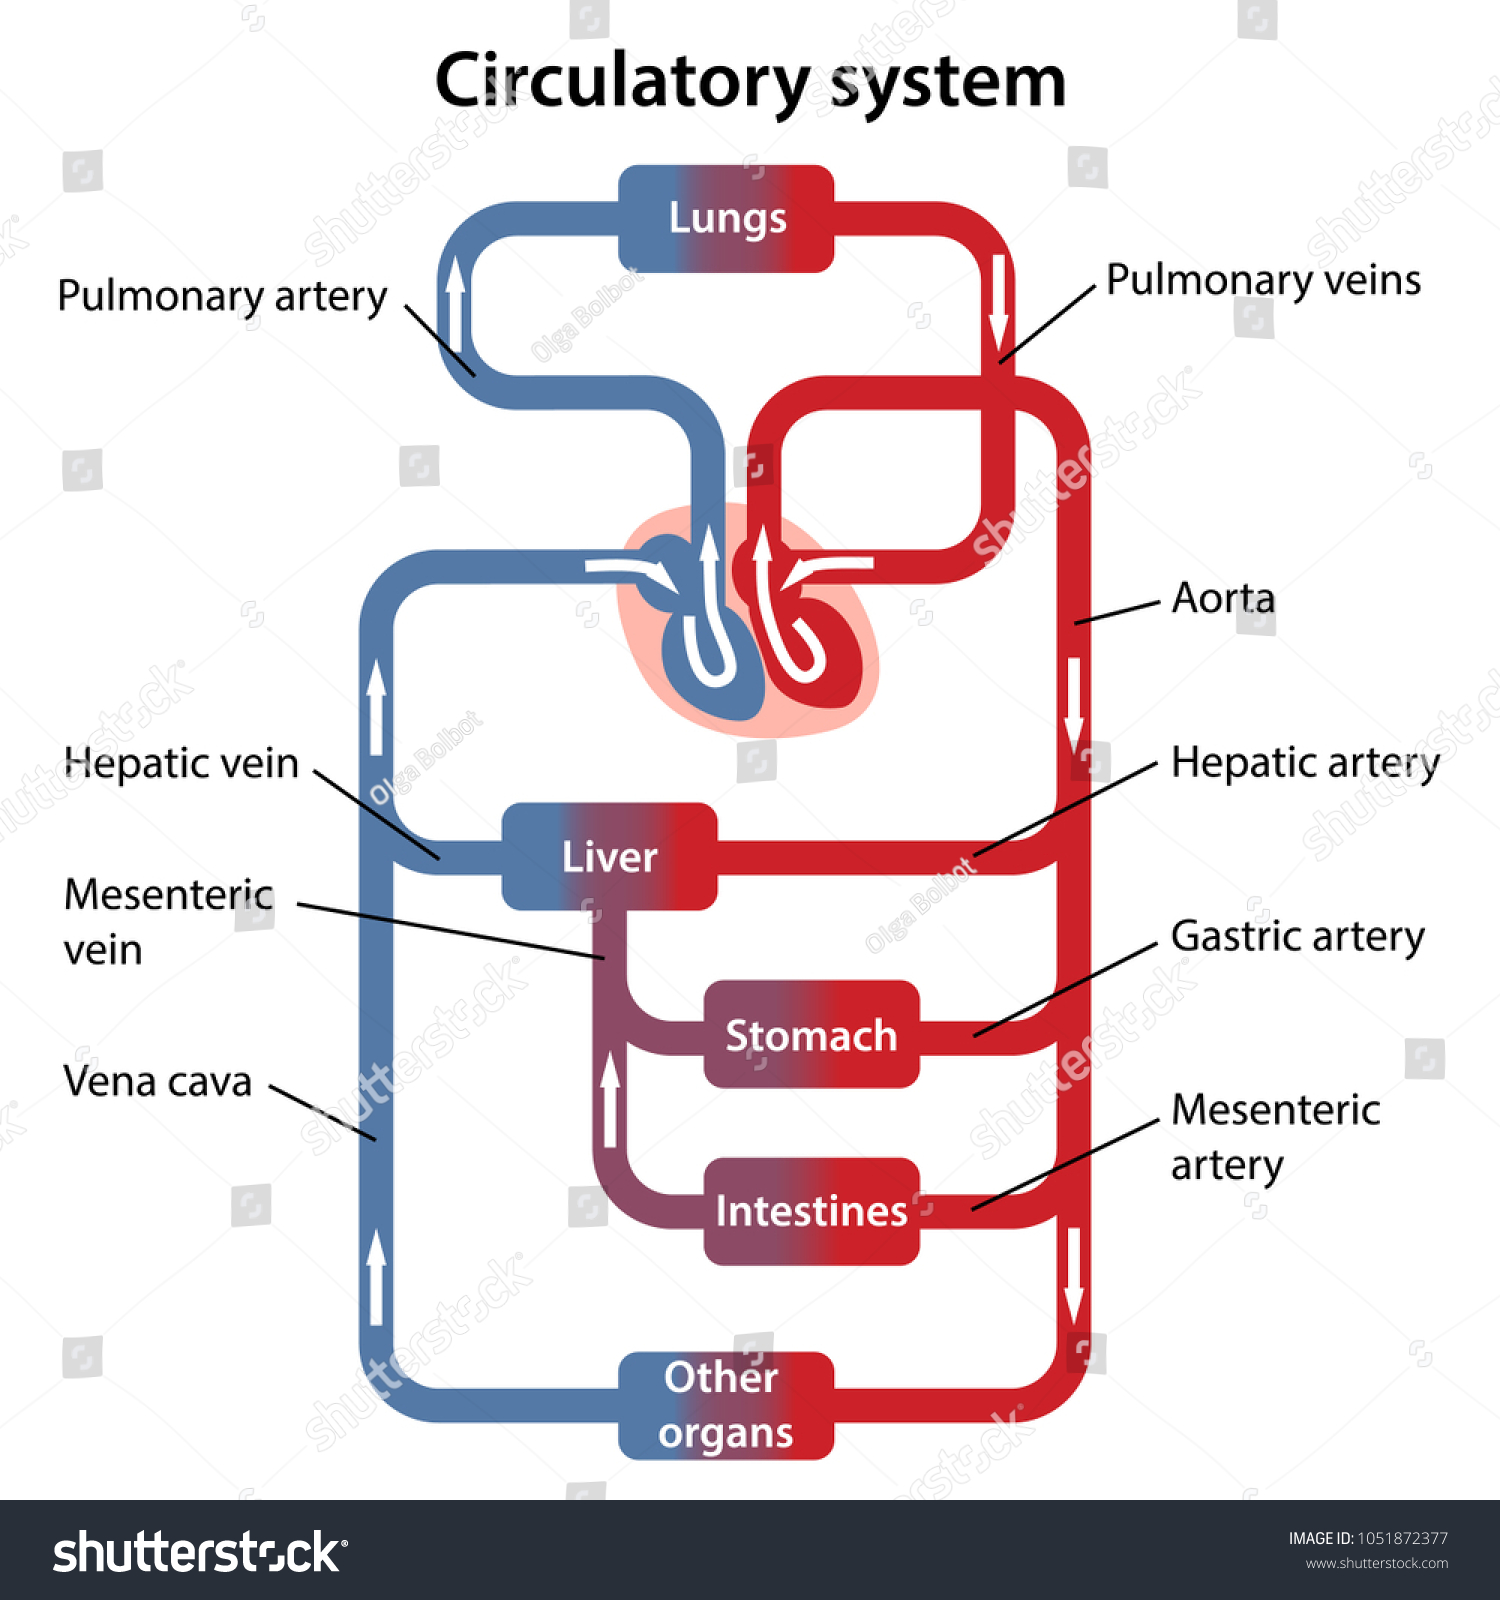 Circulatory System Labeled Diagram | World of Reference